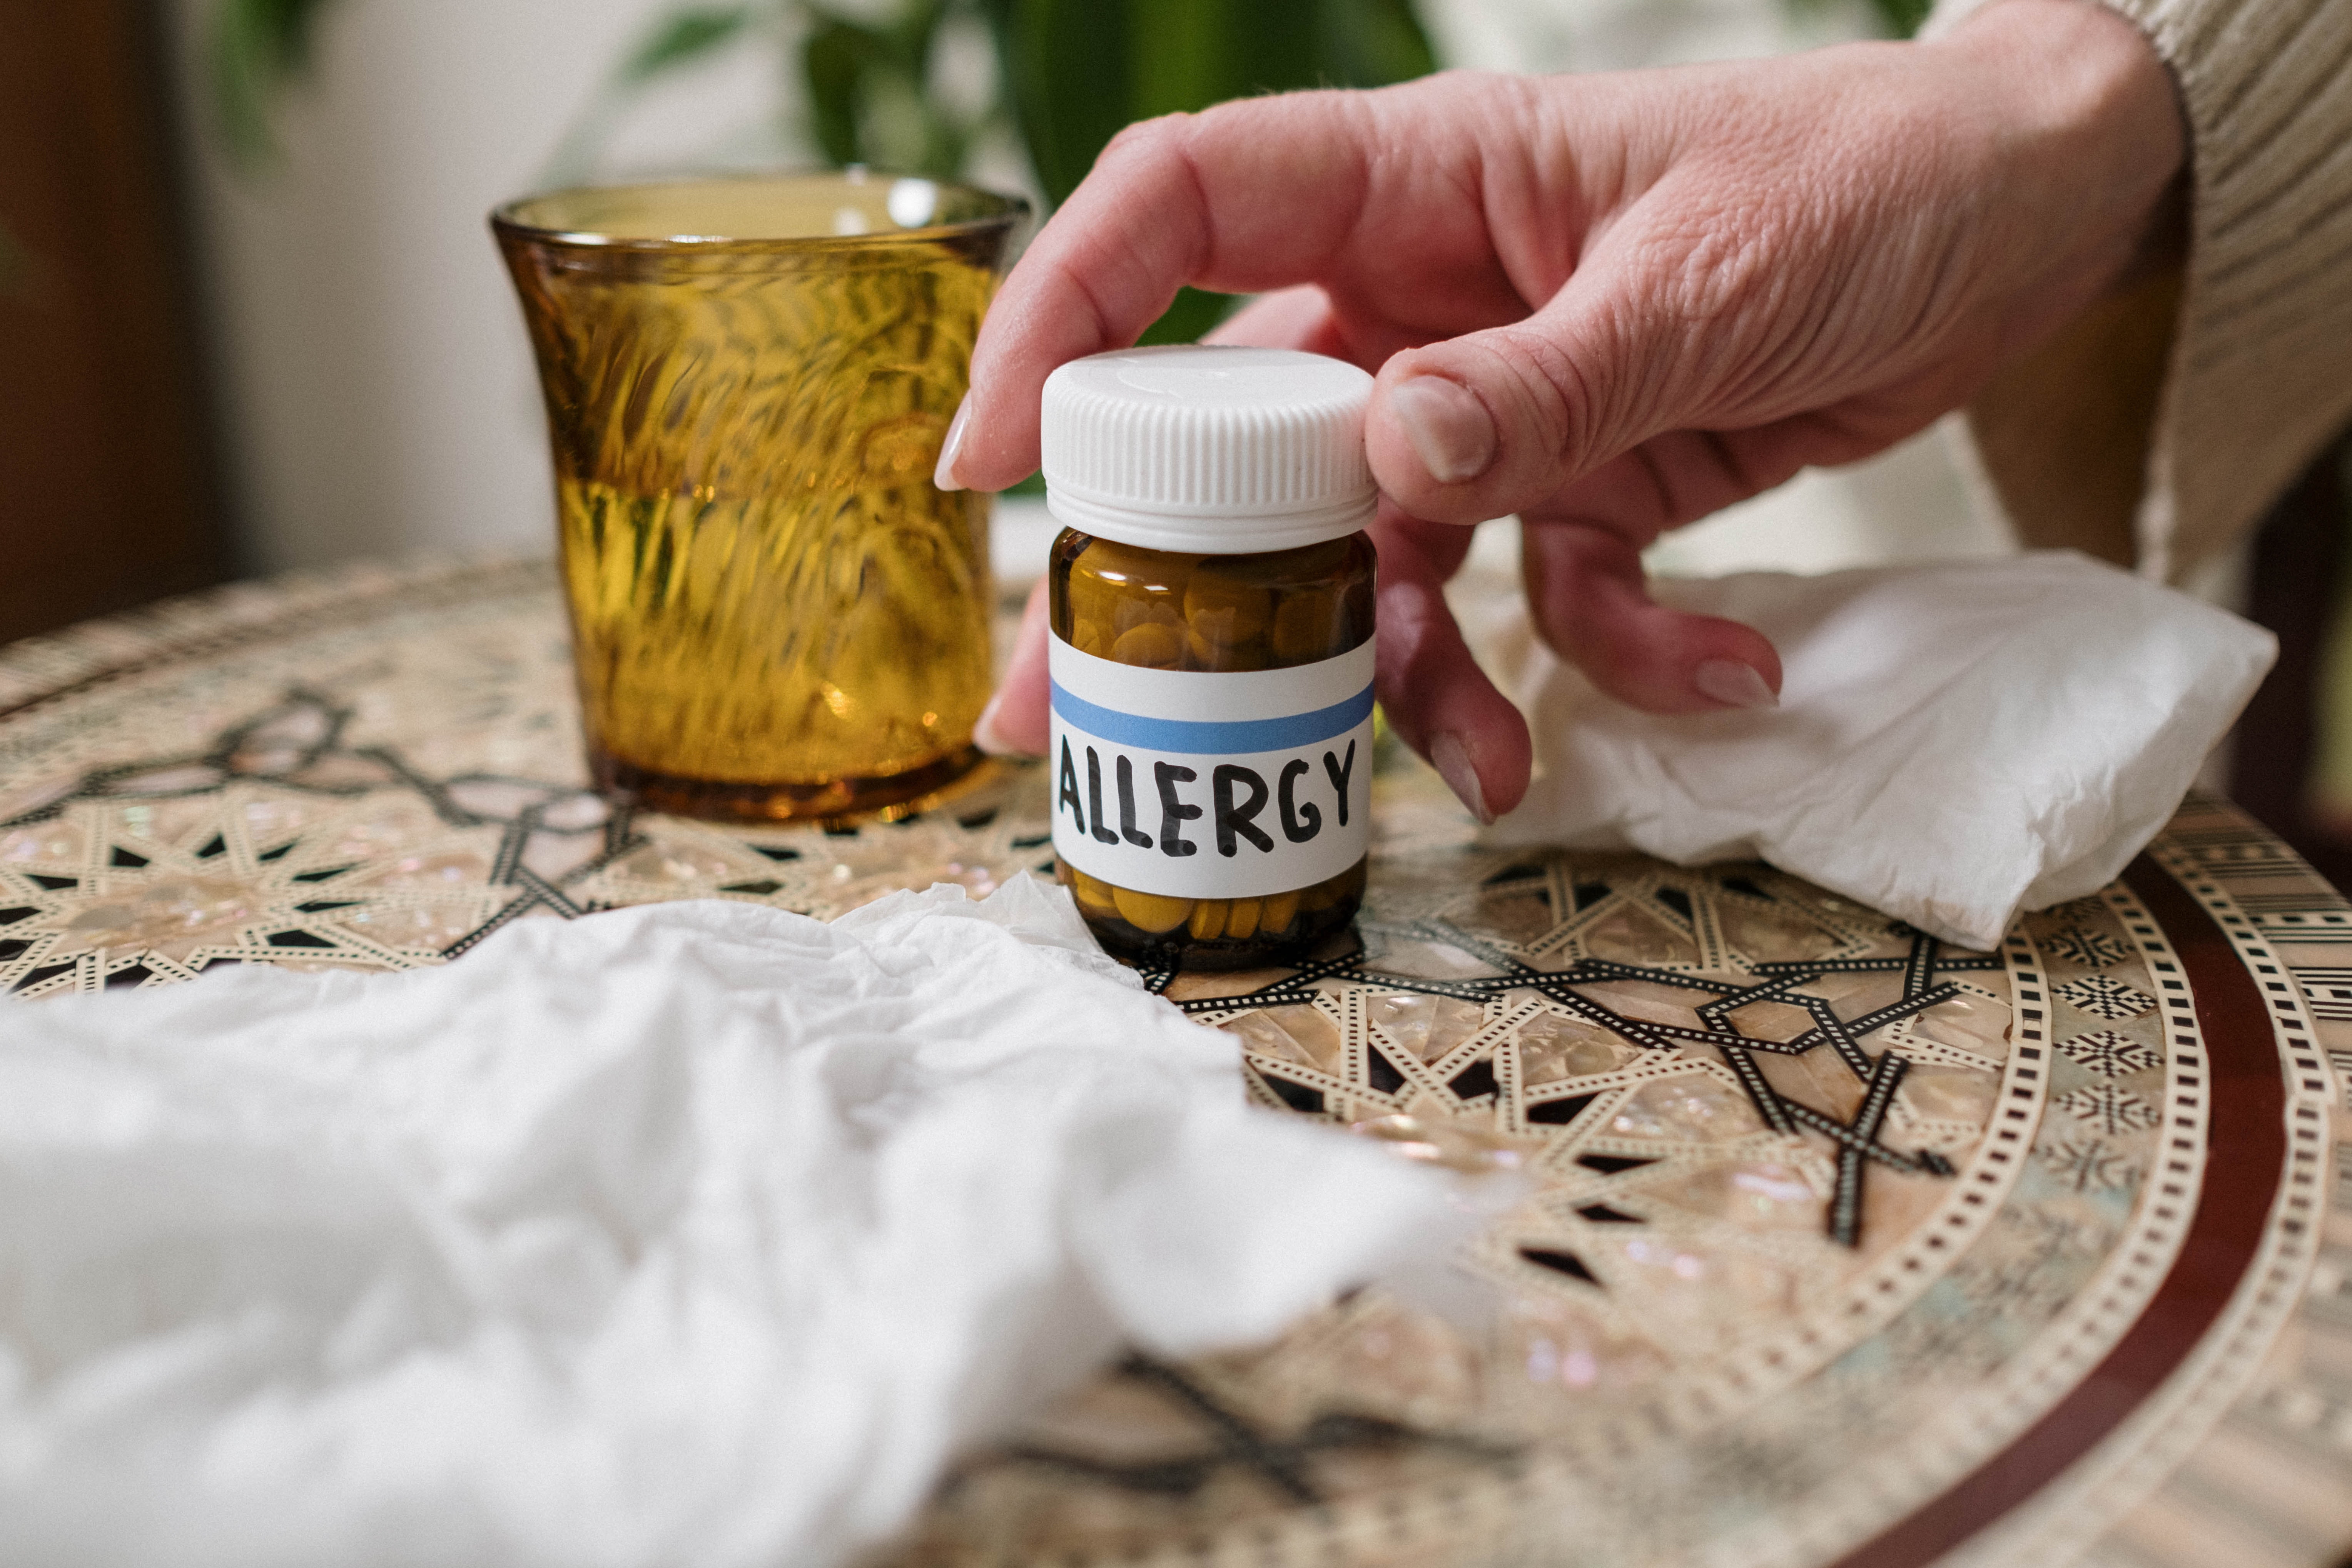 are-you-living-allergy-did-you-know-herbal-medicine